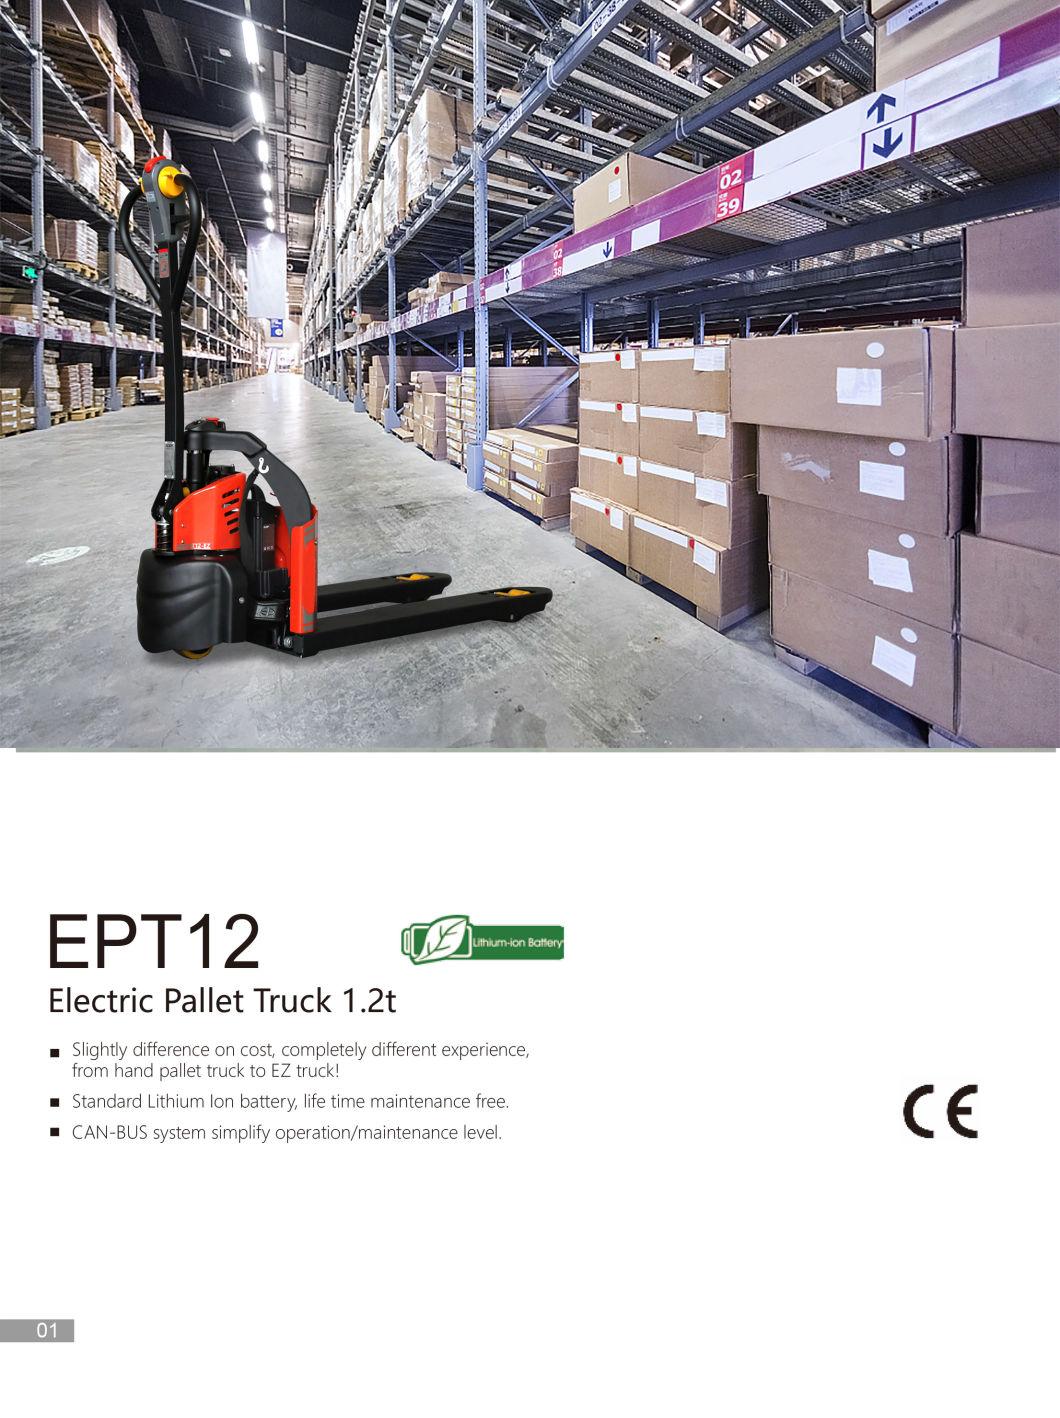 The Best and Cheapest Mini Electric Hydraulic Pallet Jack Truck